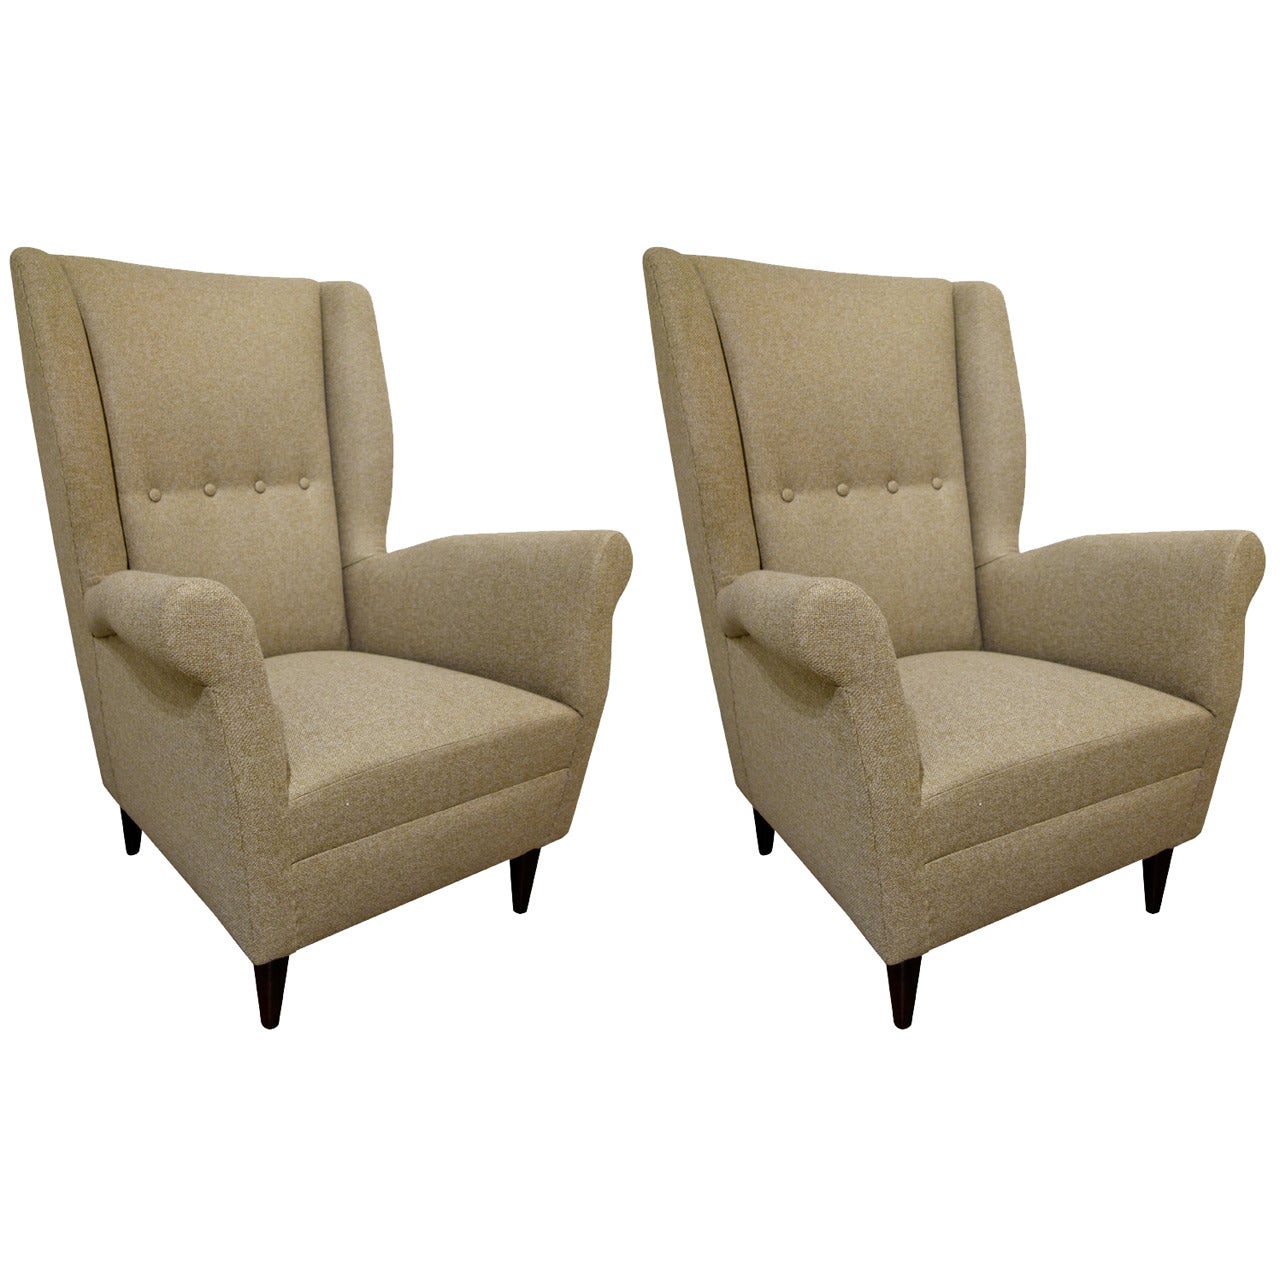 Pair Of Mid-Century Italian High Back Sculptural Lounge Chairs